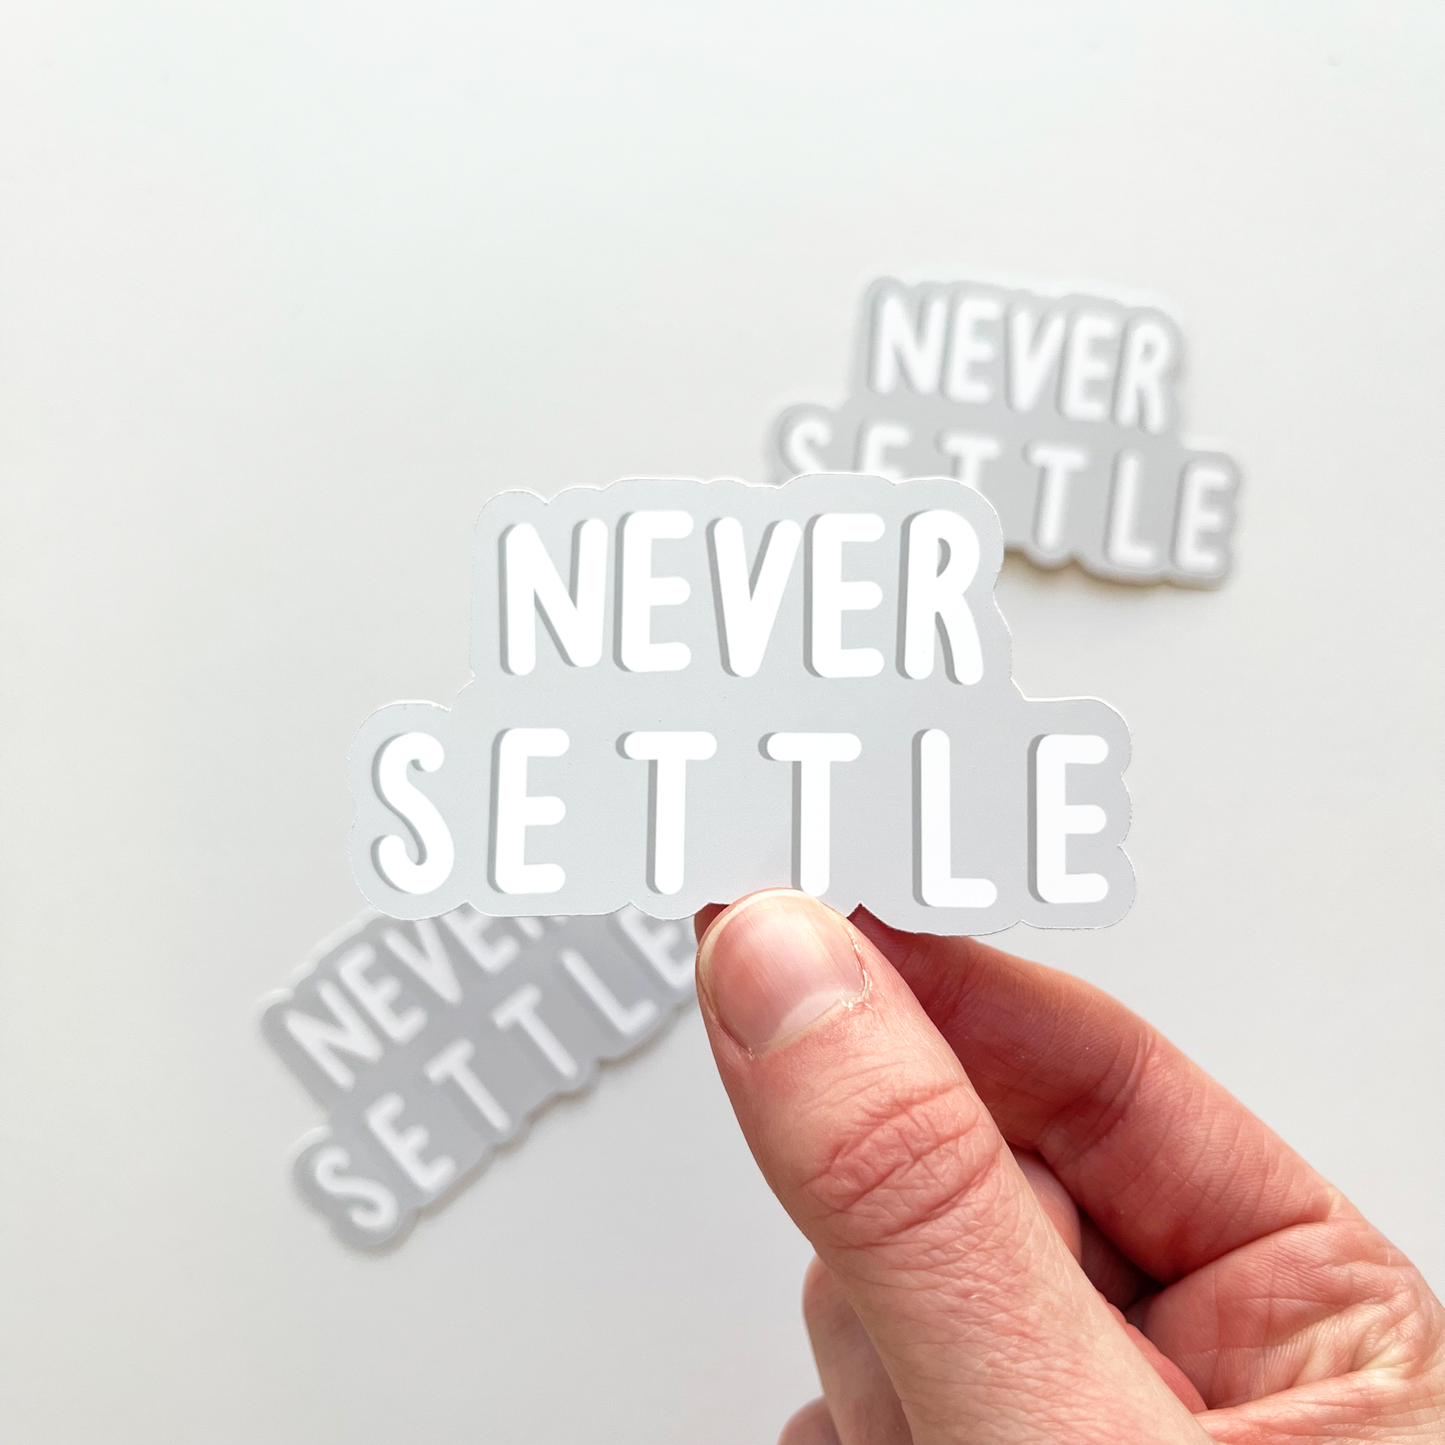 Never settle sticker with white text and a gray background